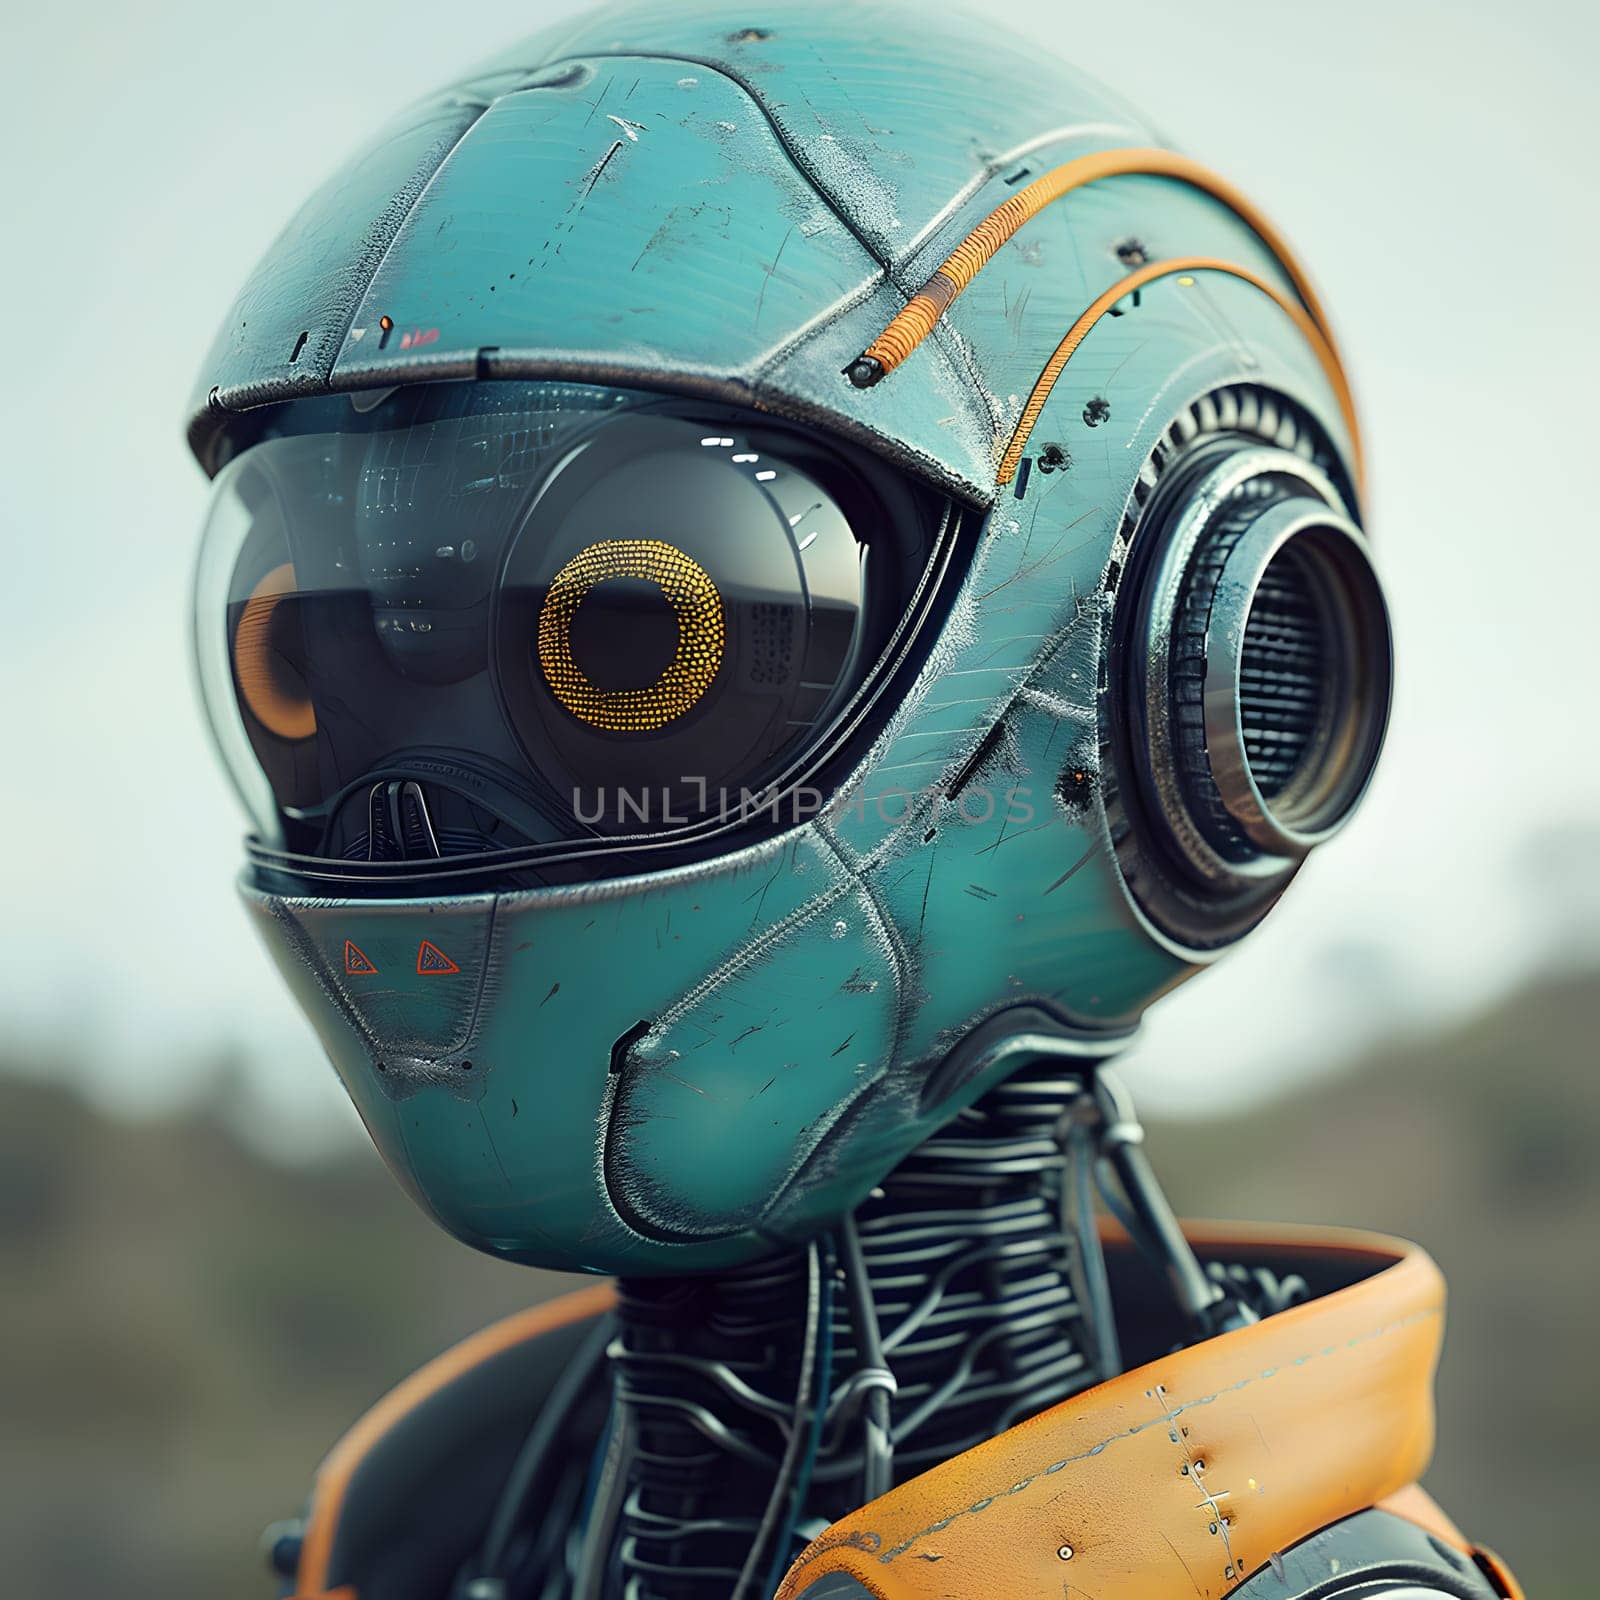 Headgearclad robot gazes at camera with headphones on, in electric blue color by Nadtochiy